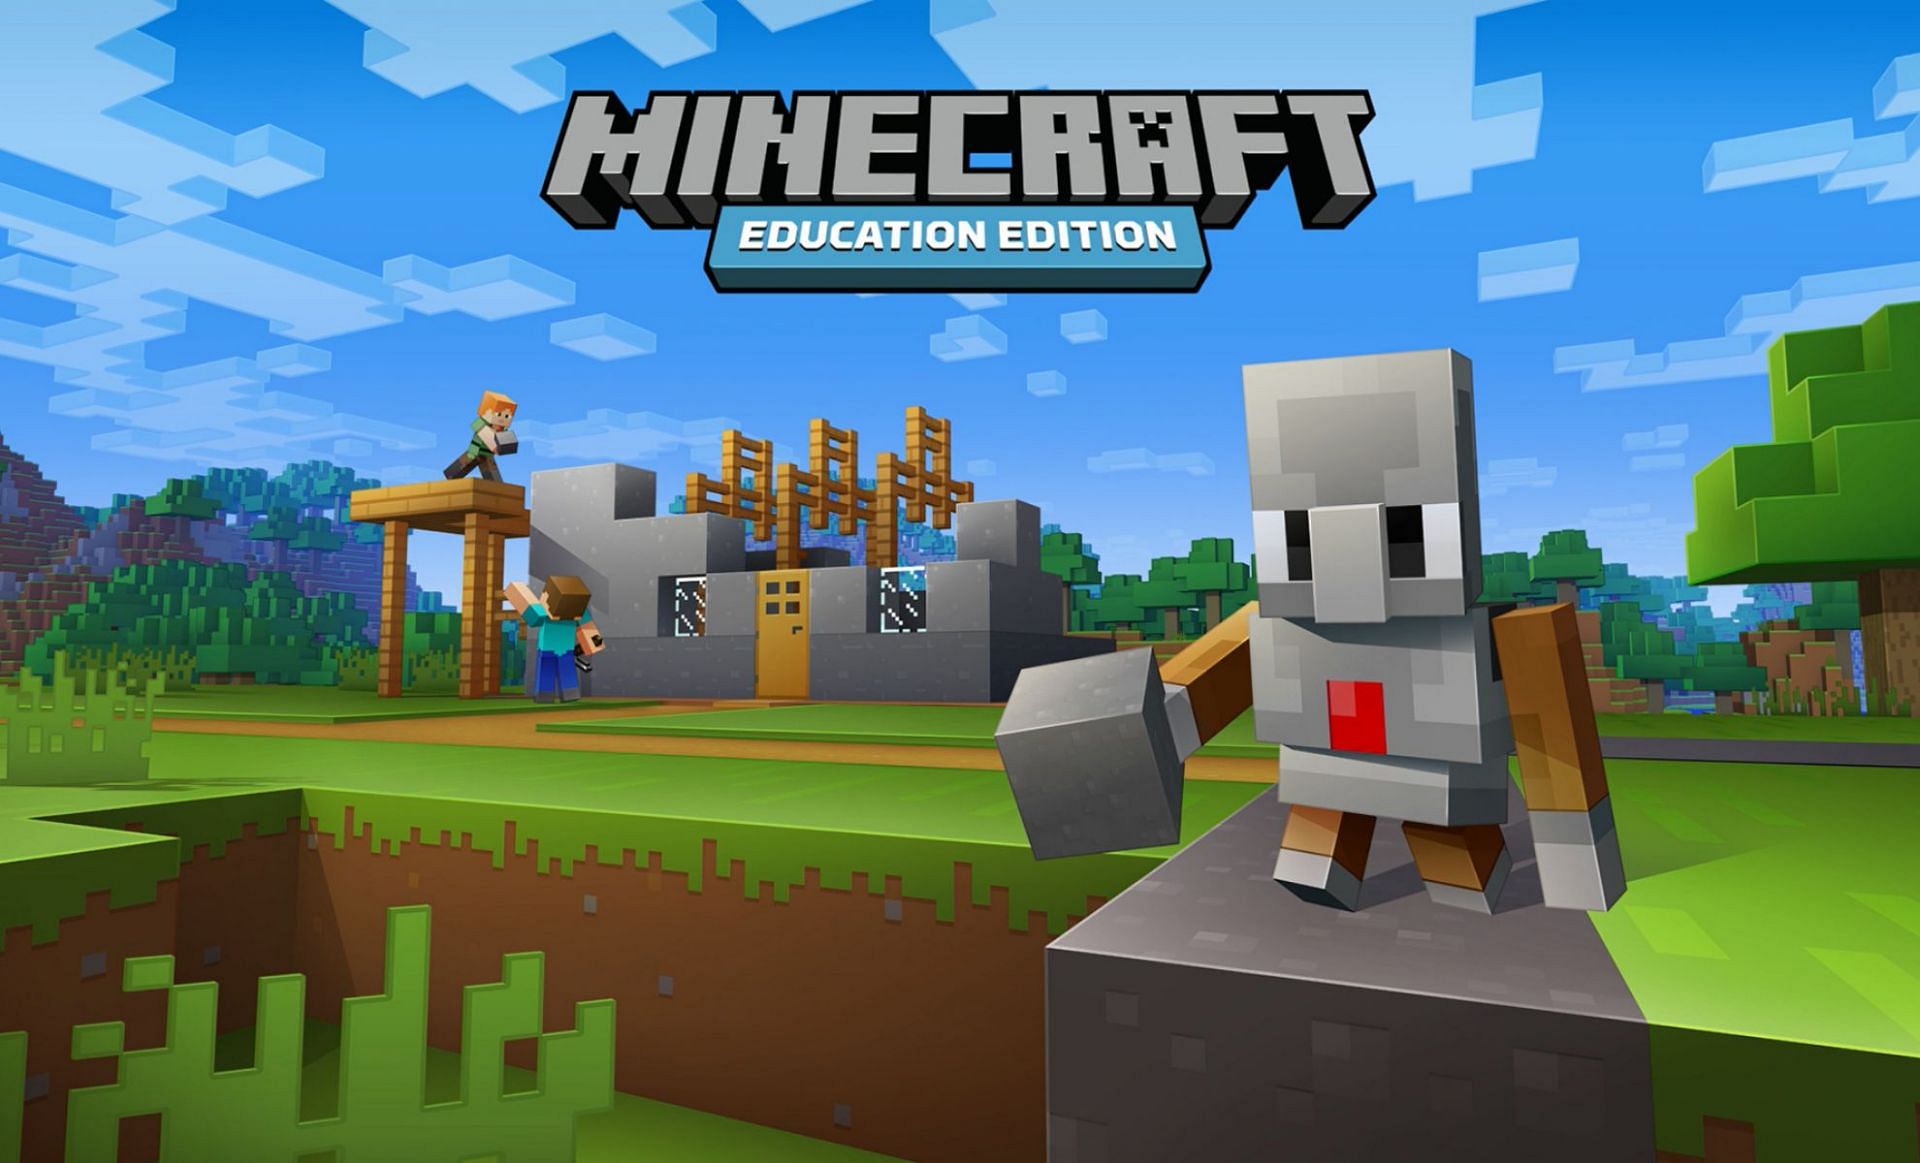 Minecraft Education Edition is meant for children as a learning experience (Image via Mojang)